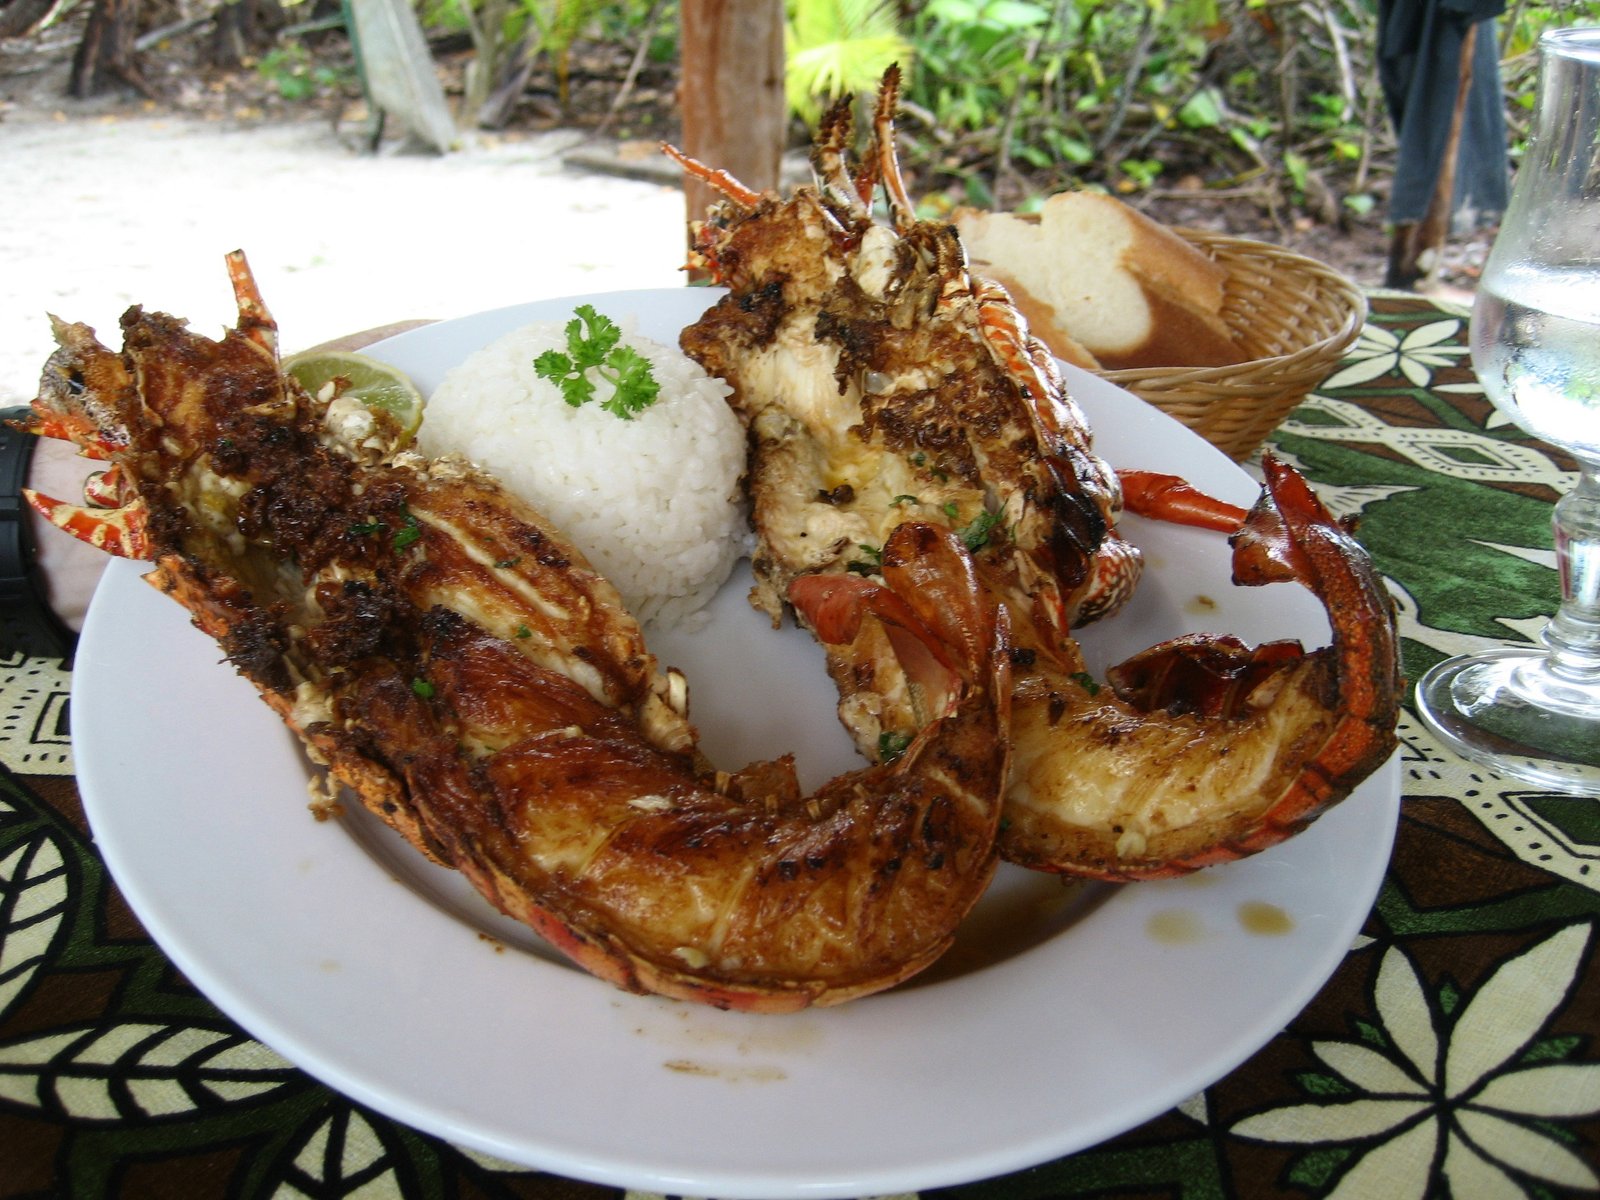 Lobster in New Caledonia